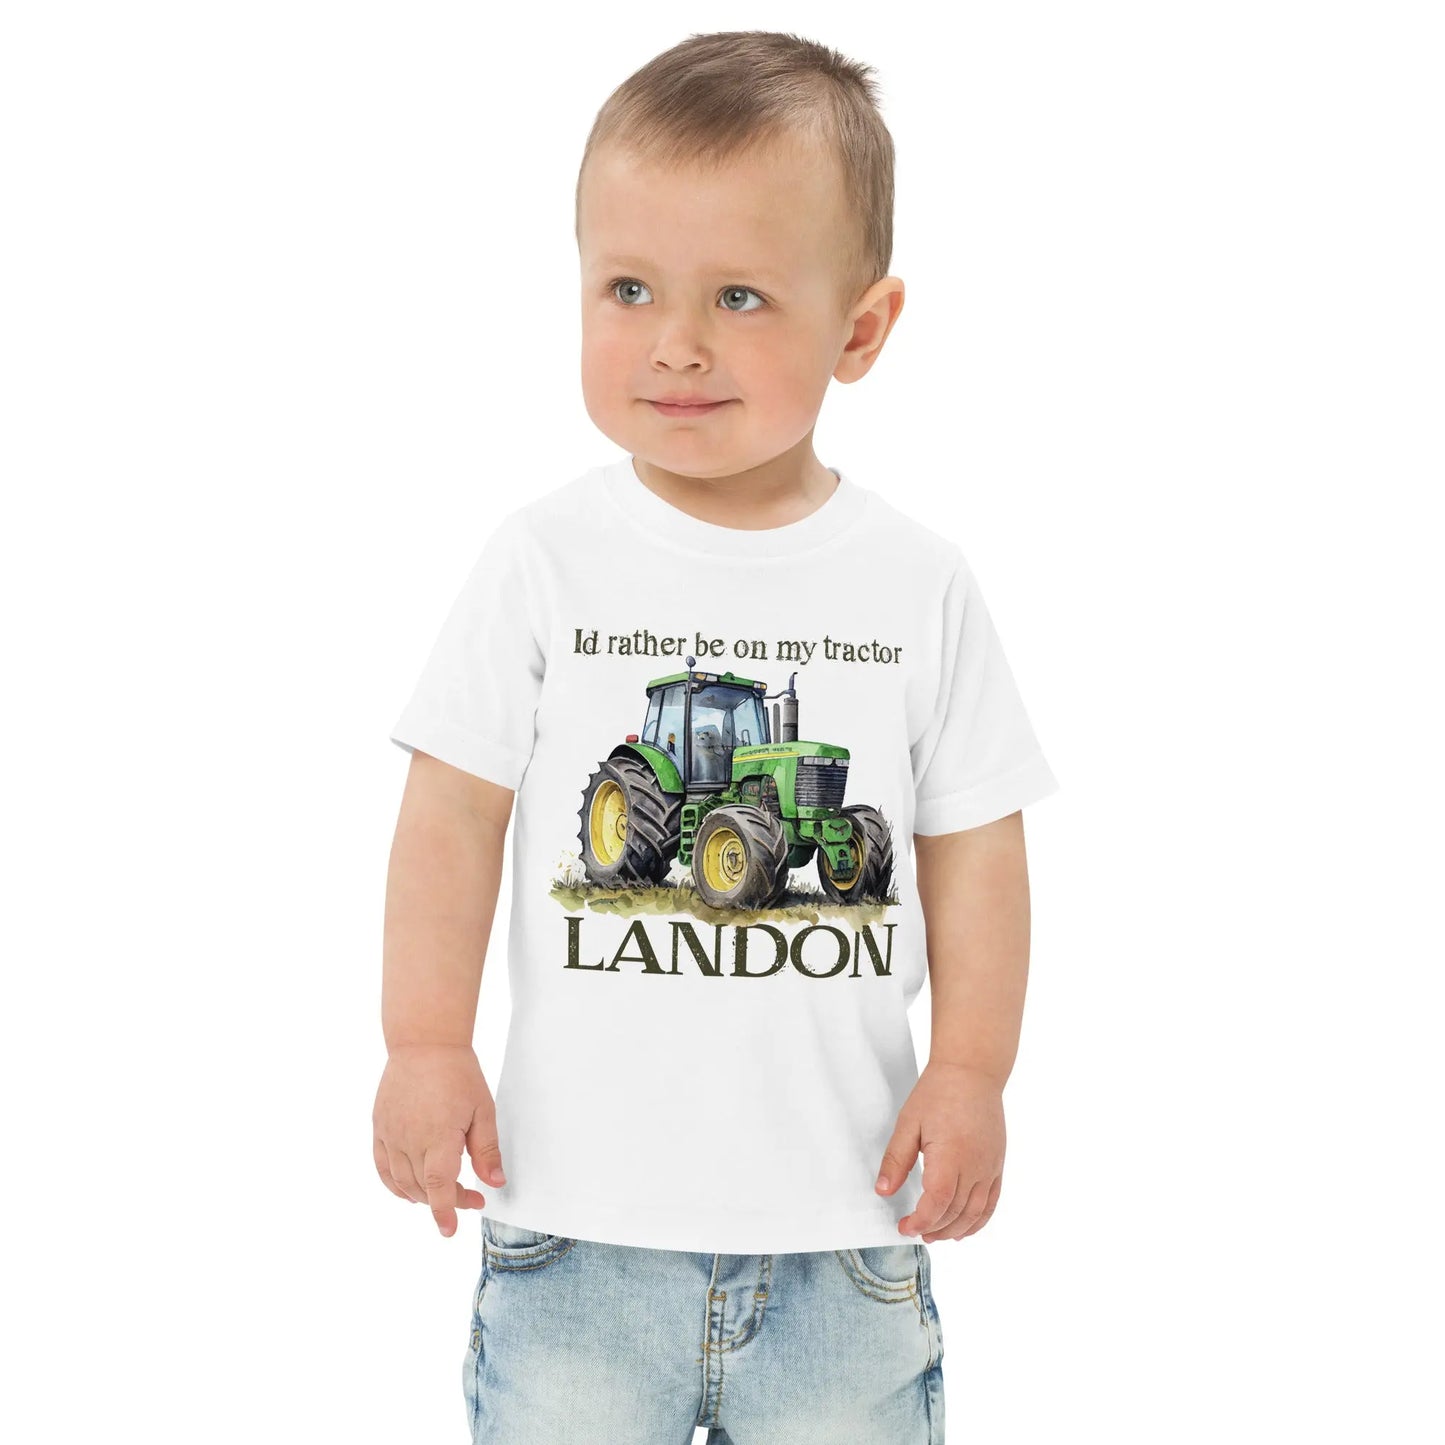 Personalized Tractor Toddler t-shirt, Farm Tractor Shirt Amazing Faith Designs